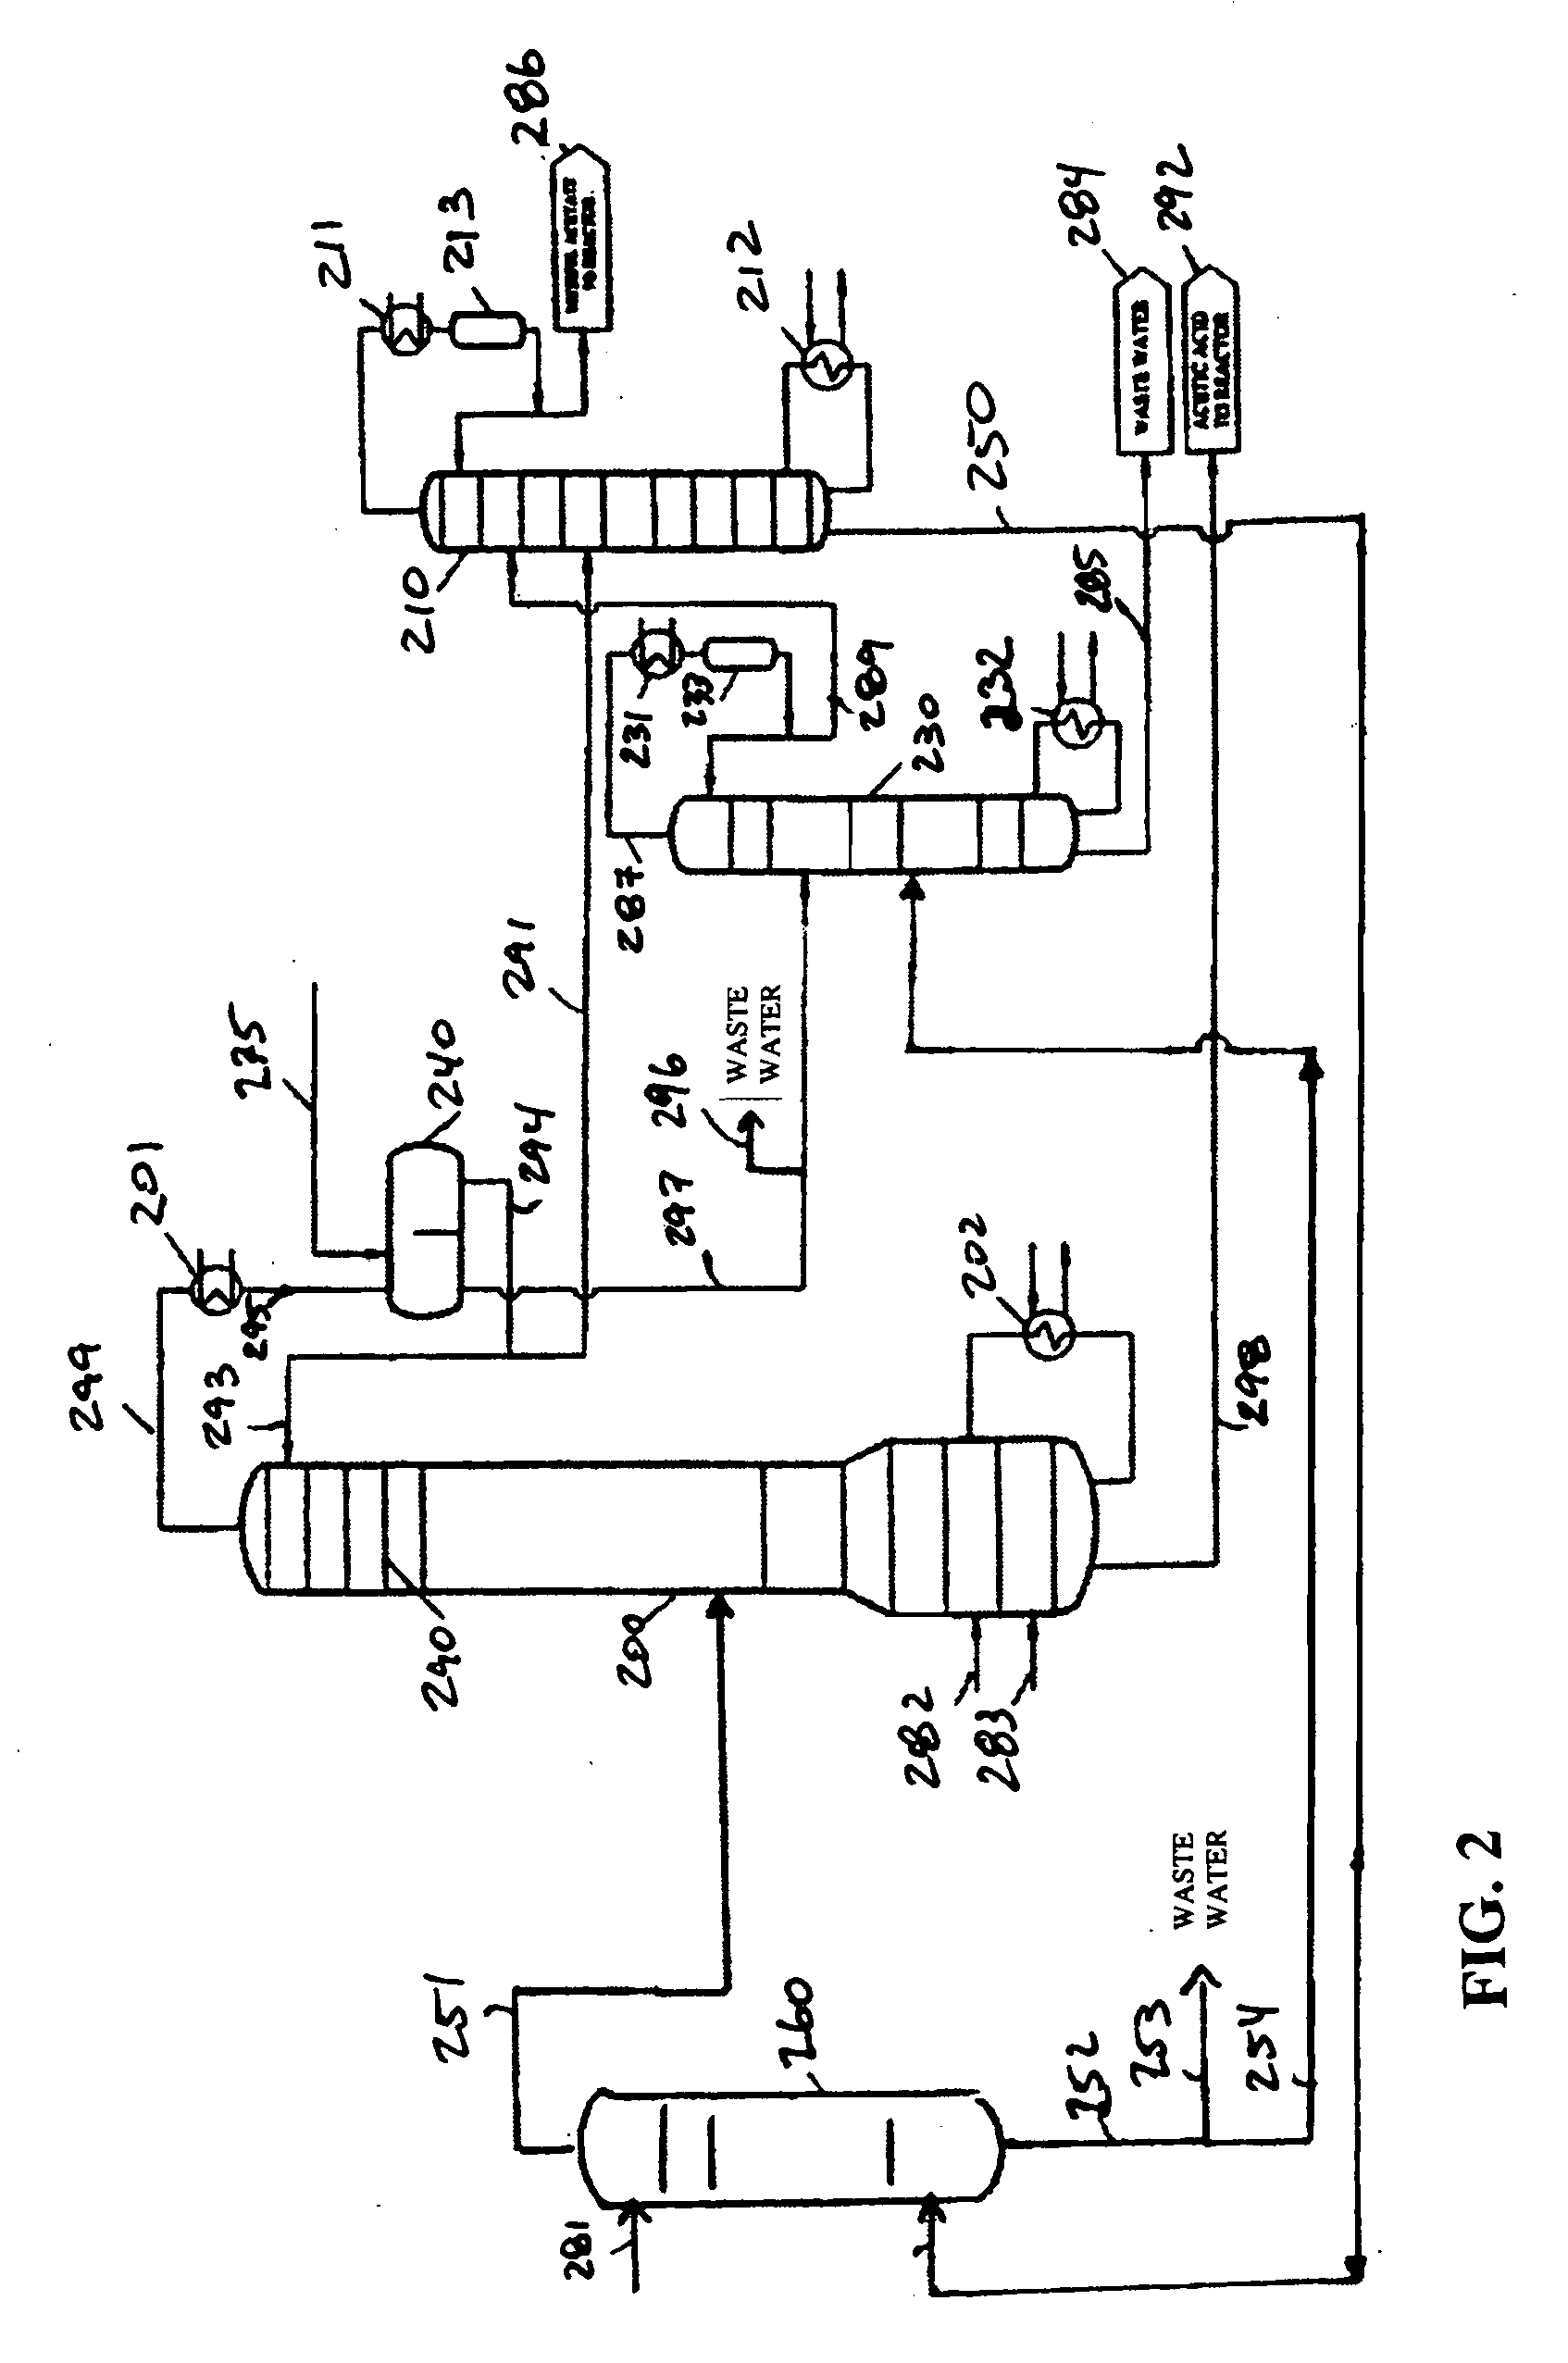 System and method for acetic acid dehydration